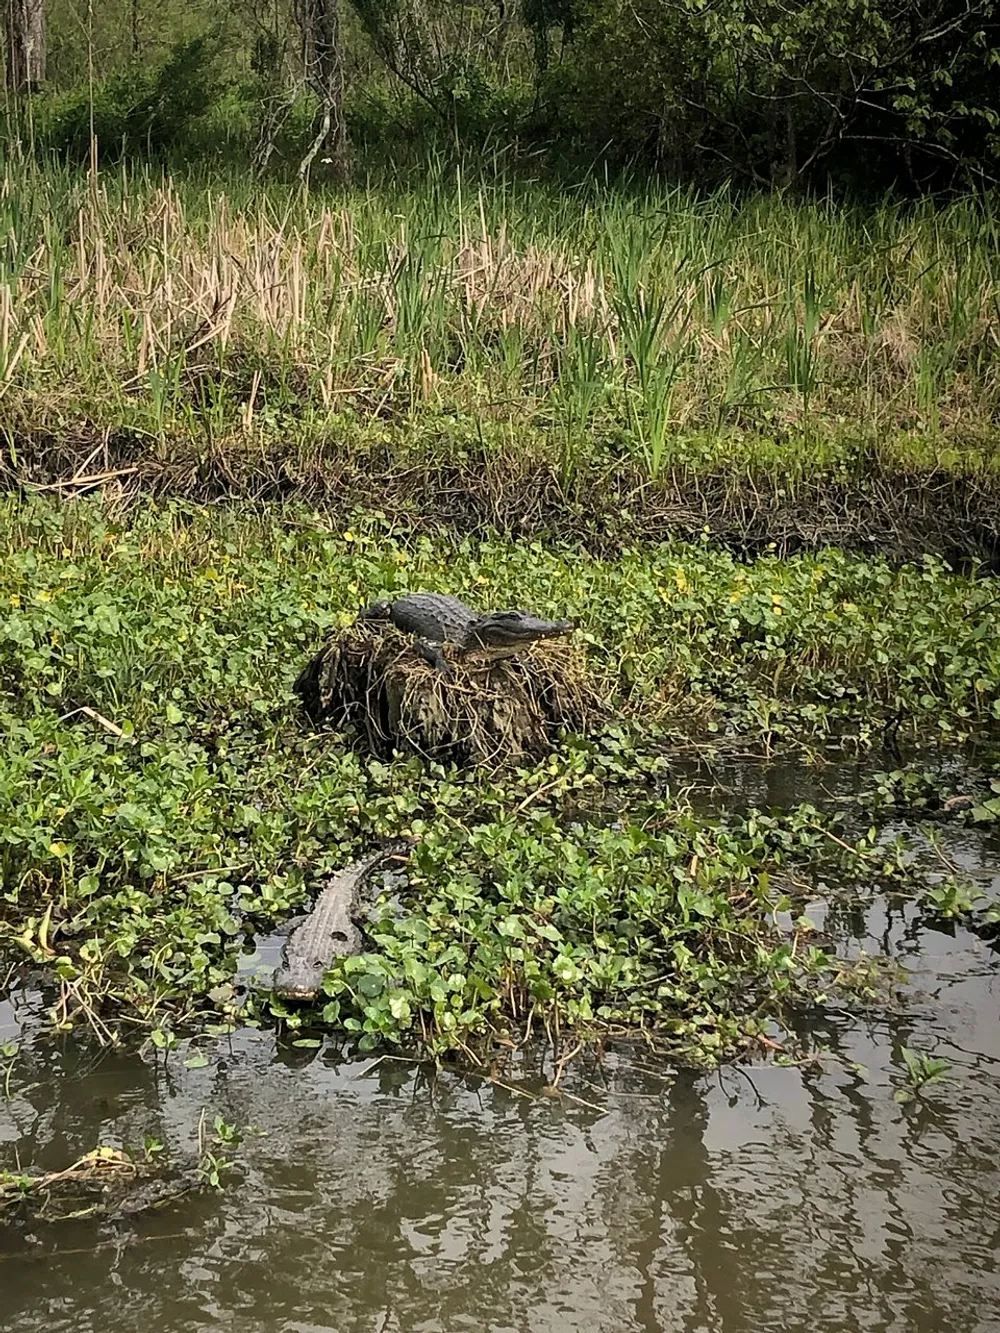 The image shows a swampy water area with vegetation where two alligators are visibleone resting on the bank and the other partially submerged in the water